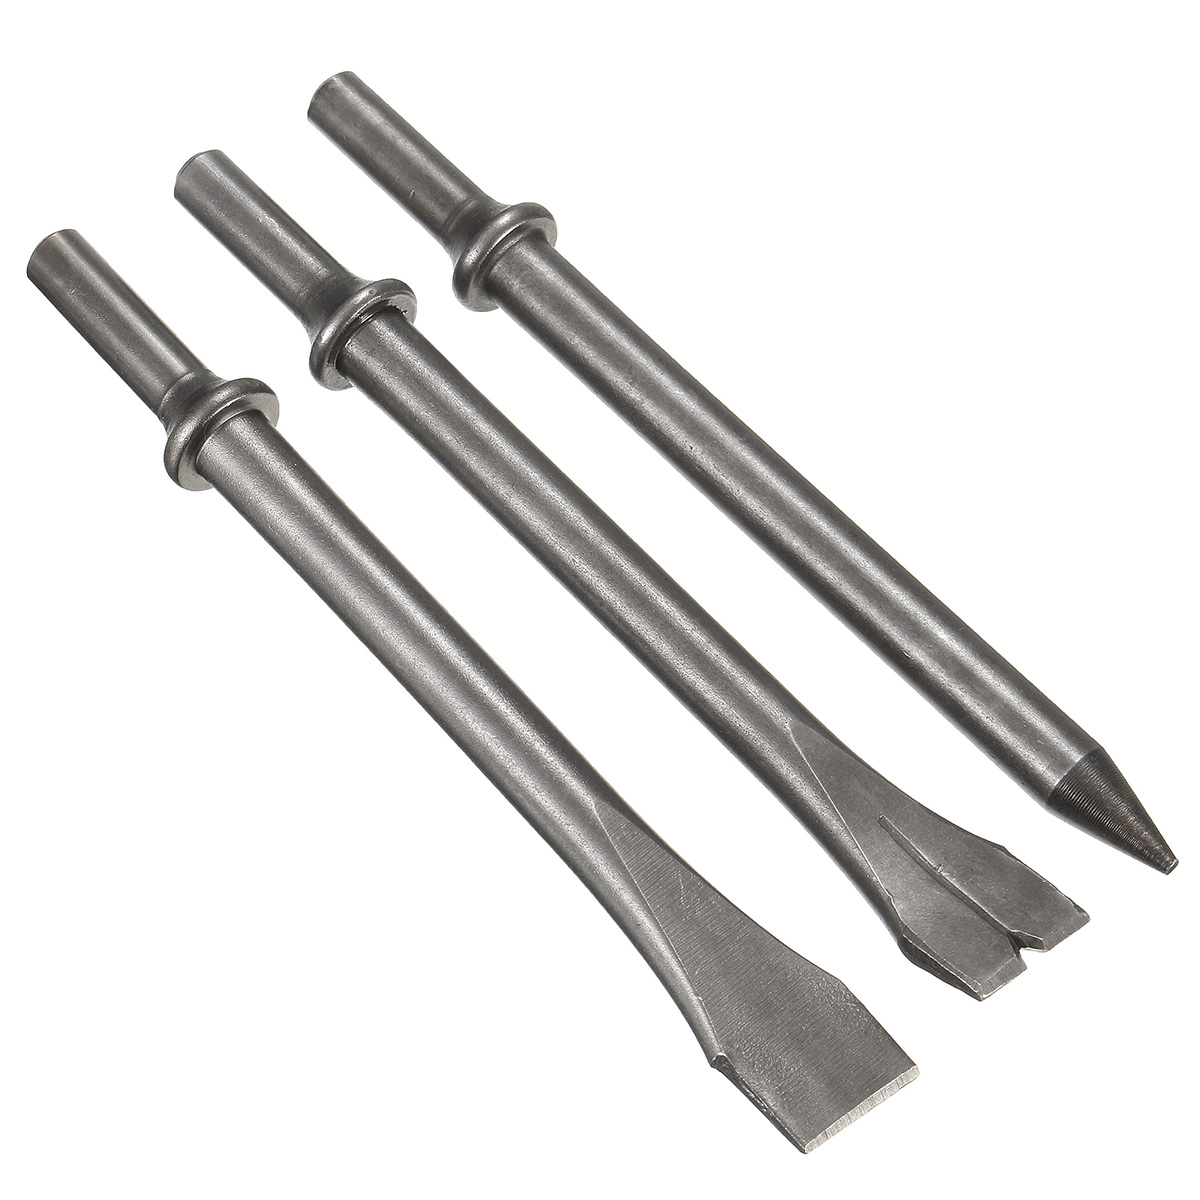 3-Pcs-7-Length-Air-Hammers-Punch-Chipping-Chisel-Set-Round-Bar-Tool-Accessory-1232824-4